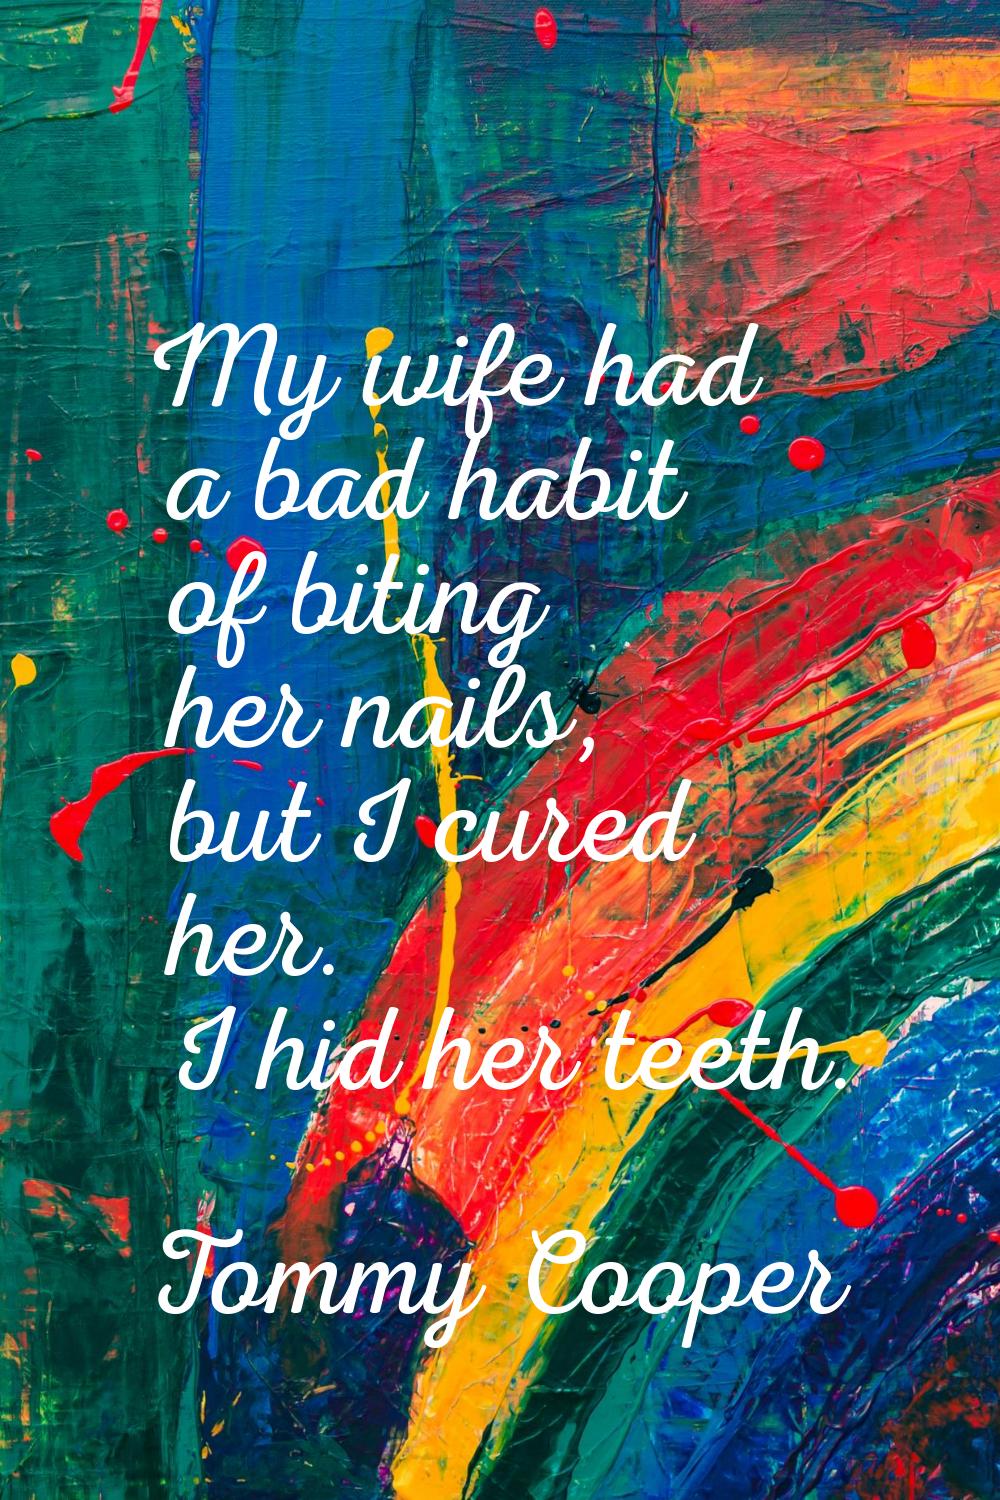 My wife had a bad habit of biting her nails, but I cured her. I hid her teeth.